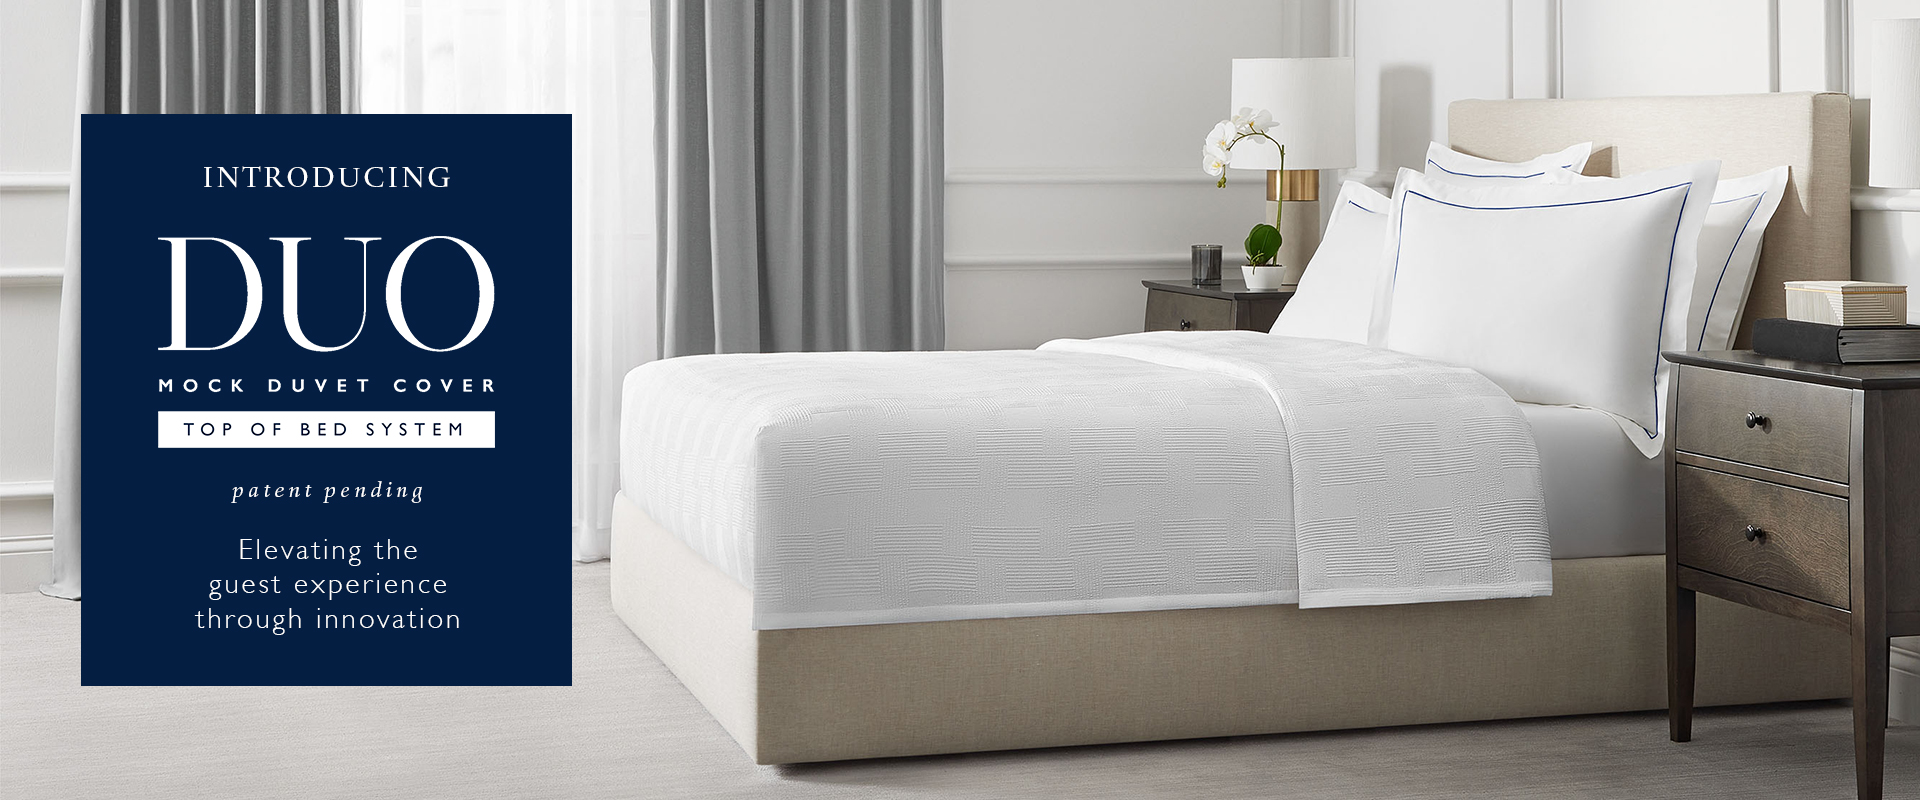 Introducing DUO Mock Duvet Top of Bed System